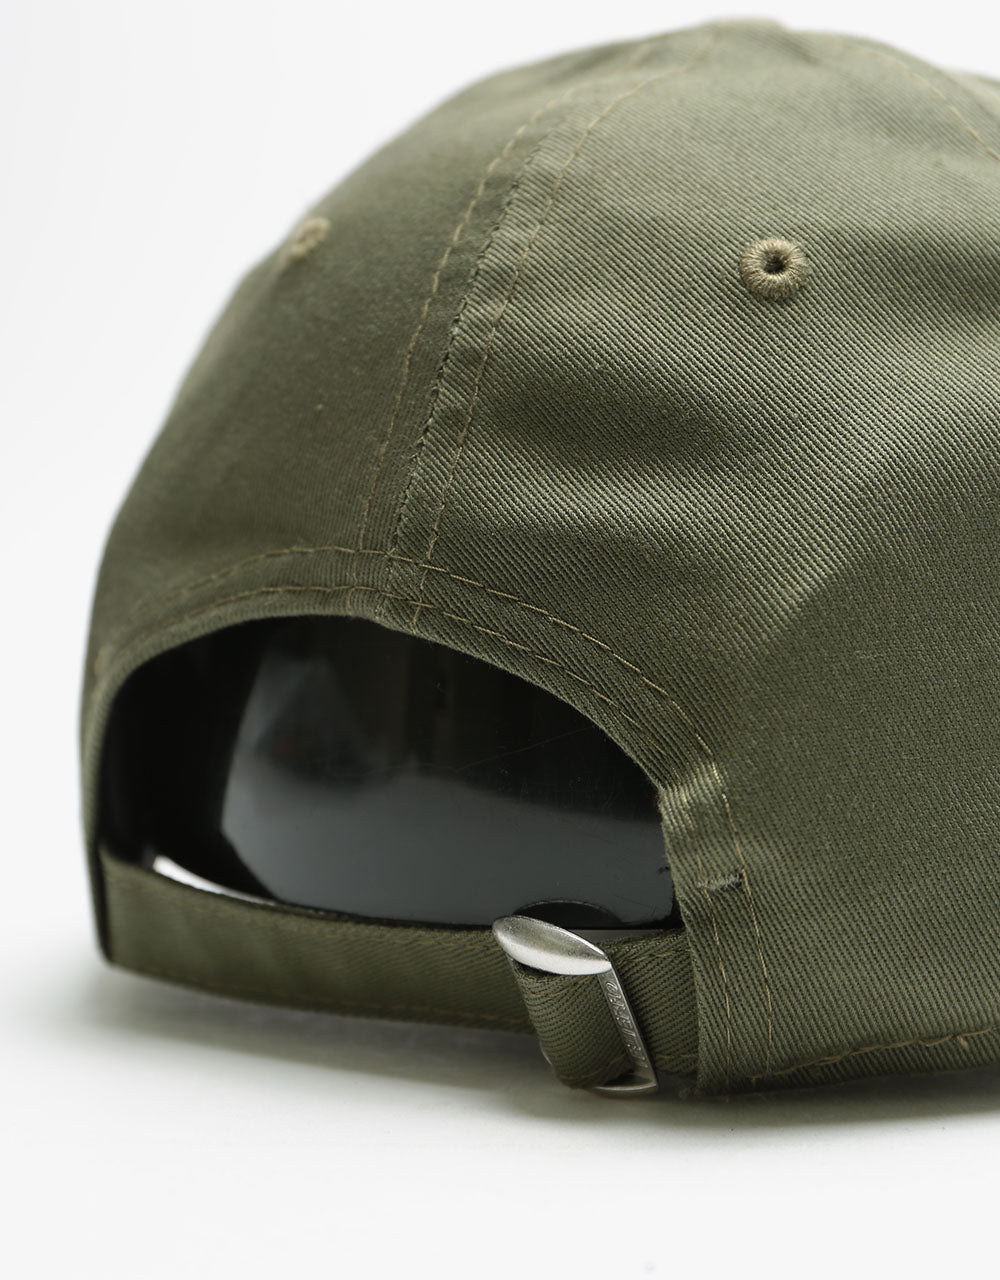 New Era 9Forty New York Yankees Infill Cap - Olive/Camo